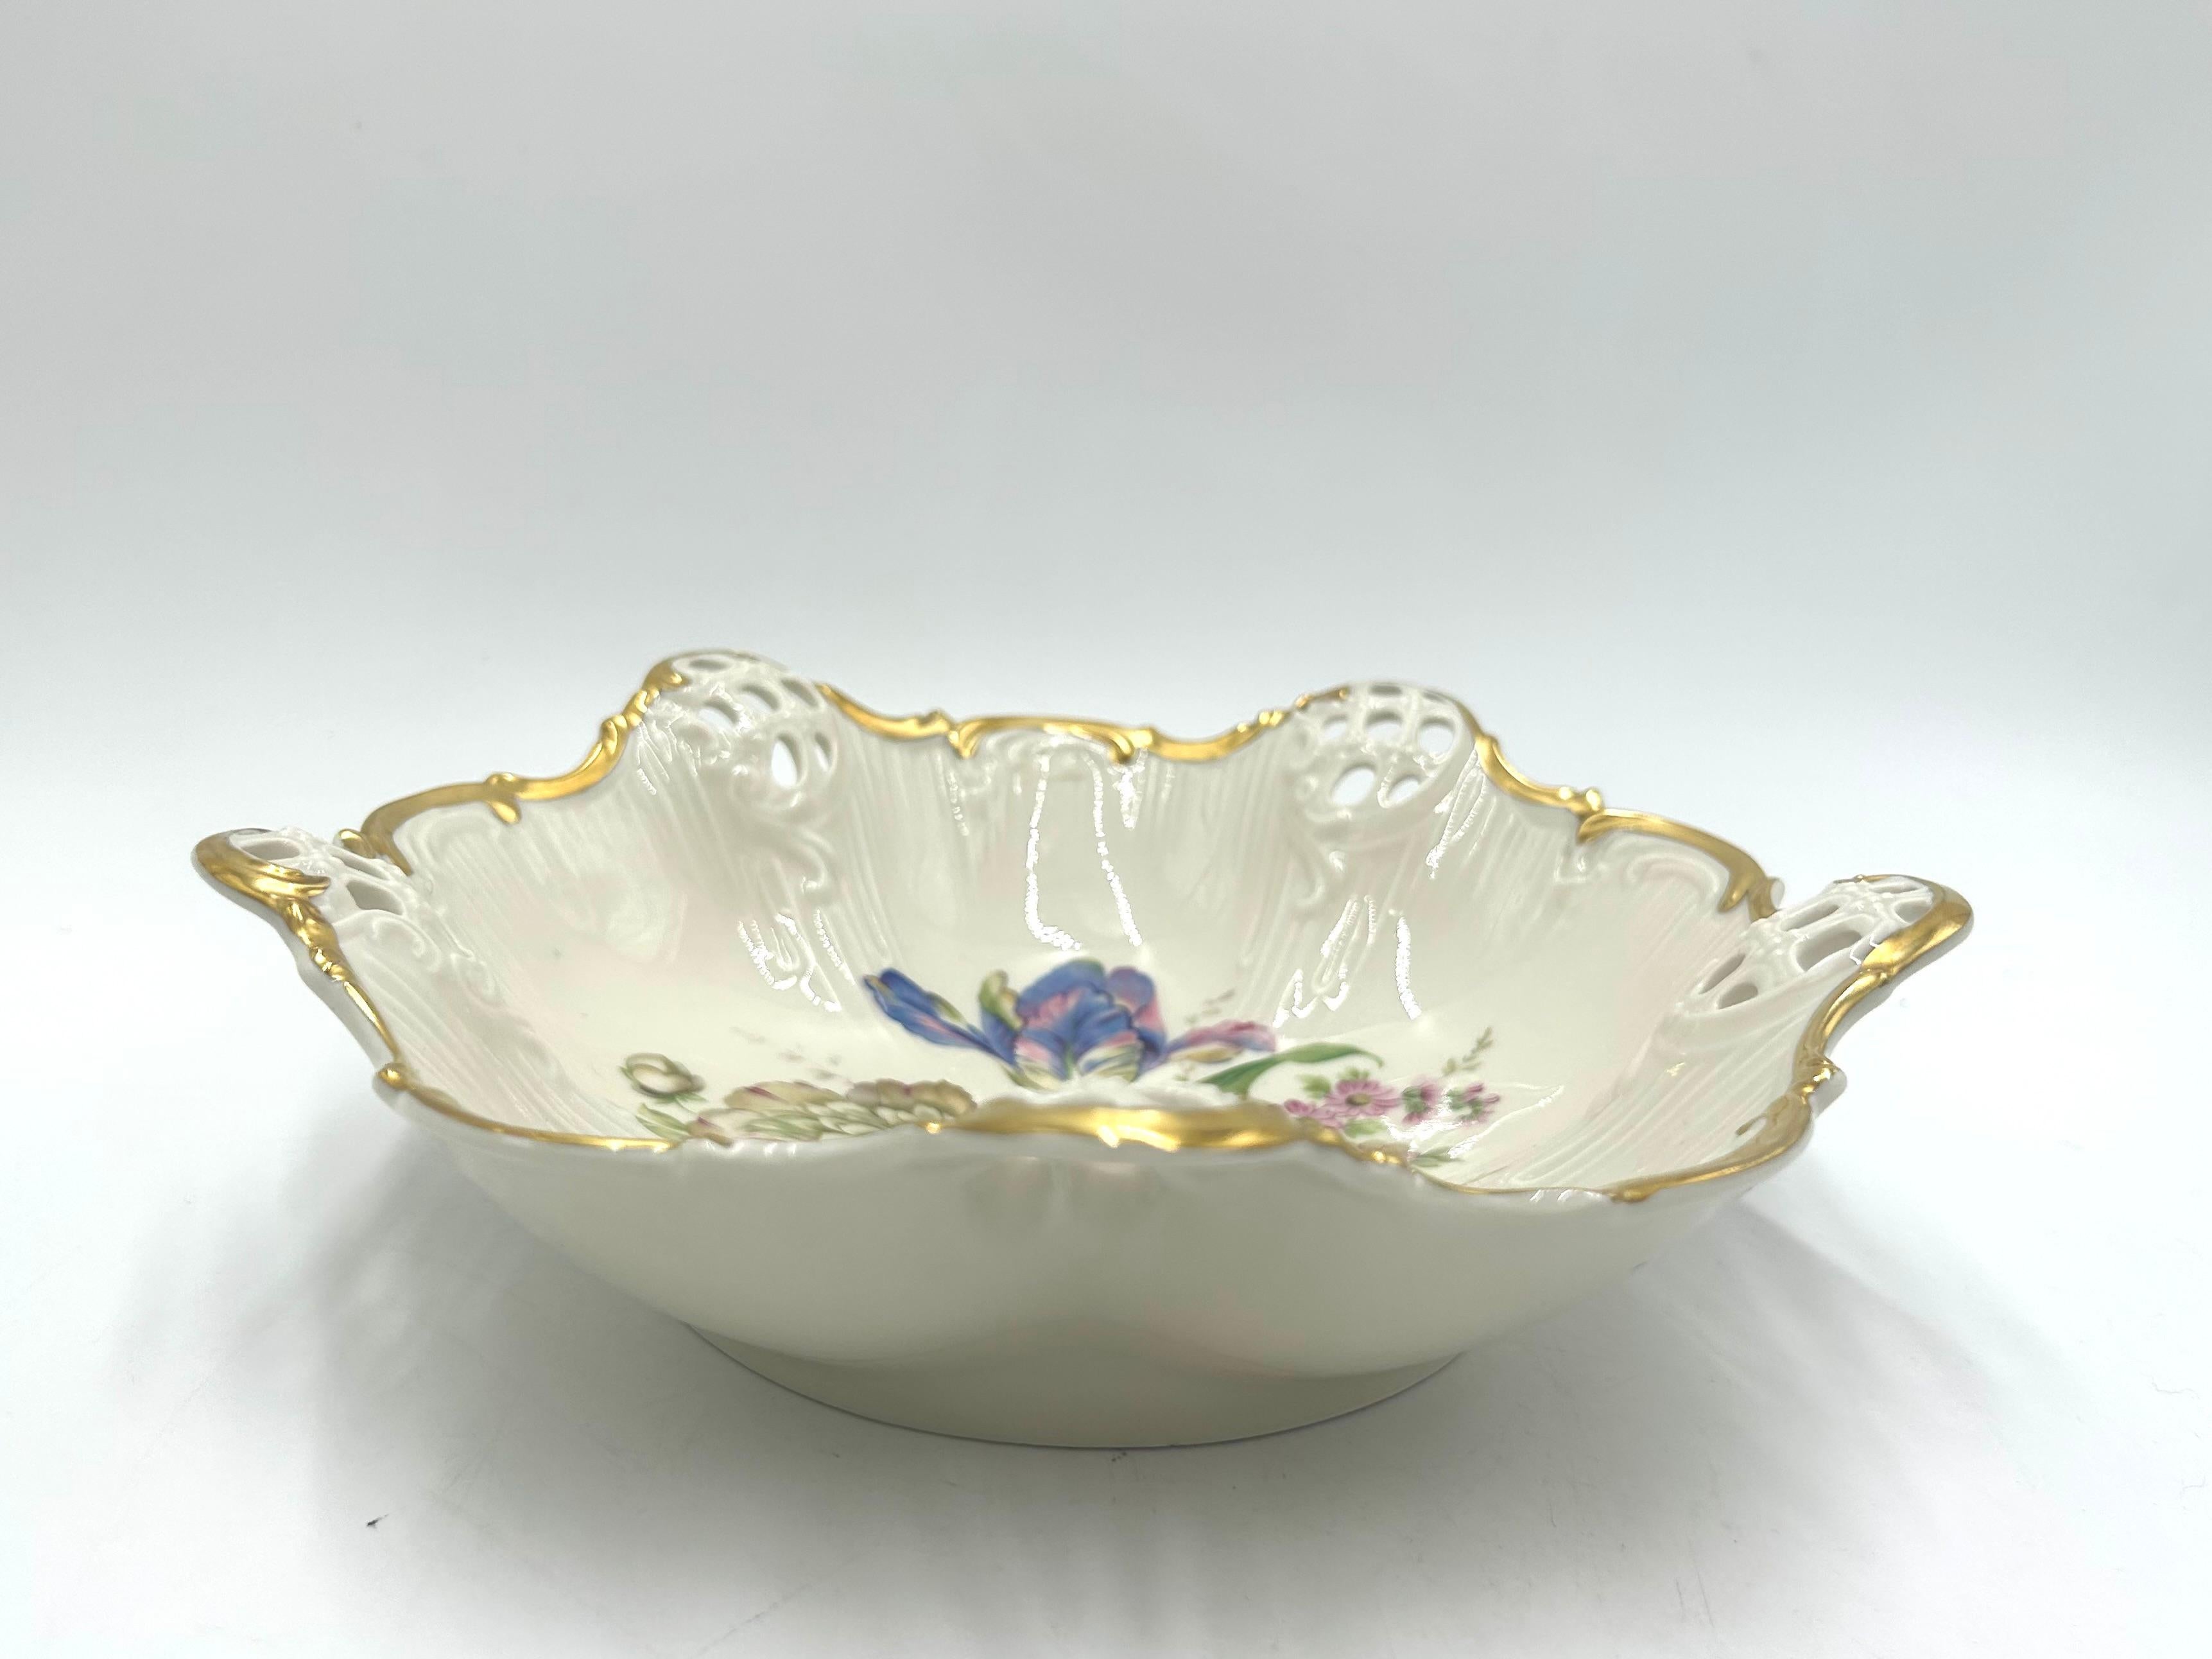 Porcelain openwork platter made of ecru porcelain, decorated with gilding and a bouquet of flowers motif. A product of the valued German manufacturer Rosenthal from the Moliere series with the Millefleurs decoration pattern. Signed with the mark